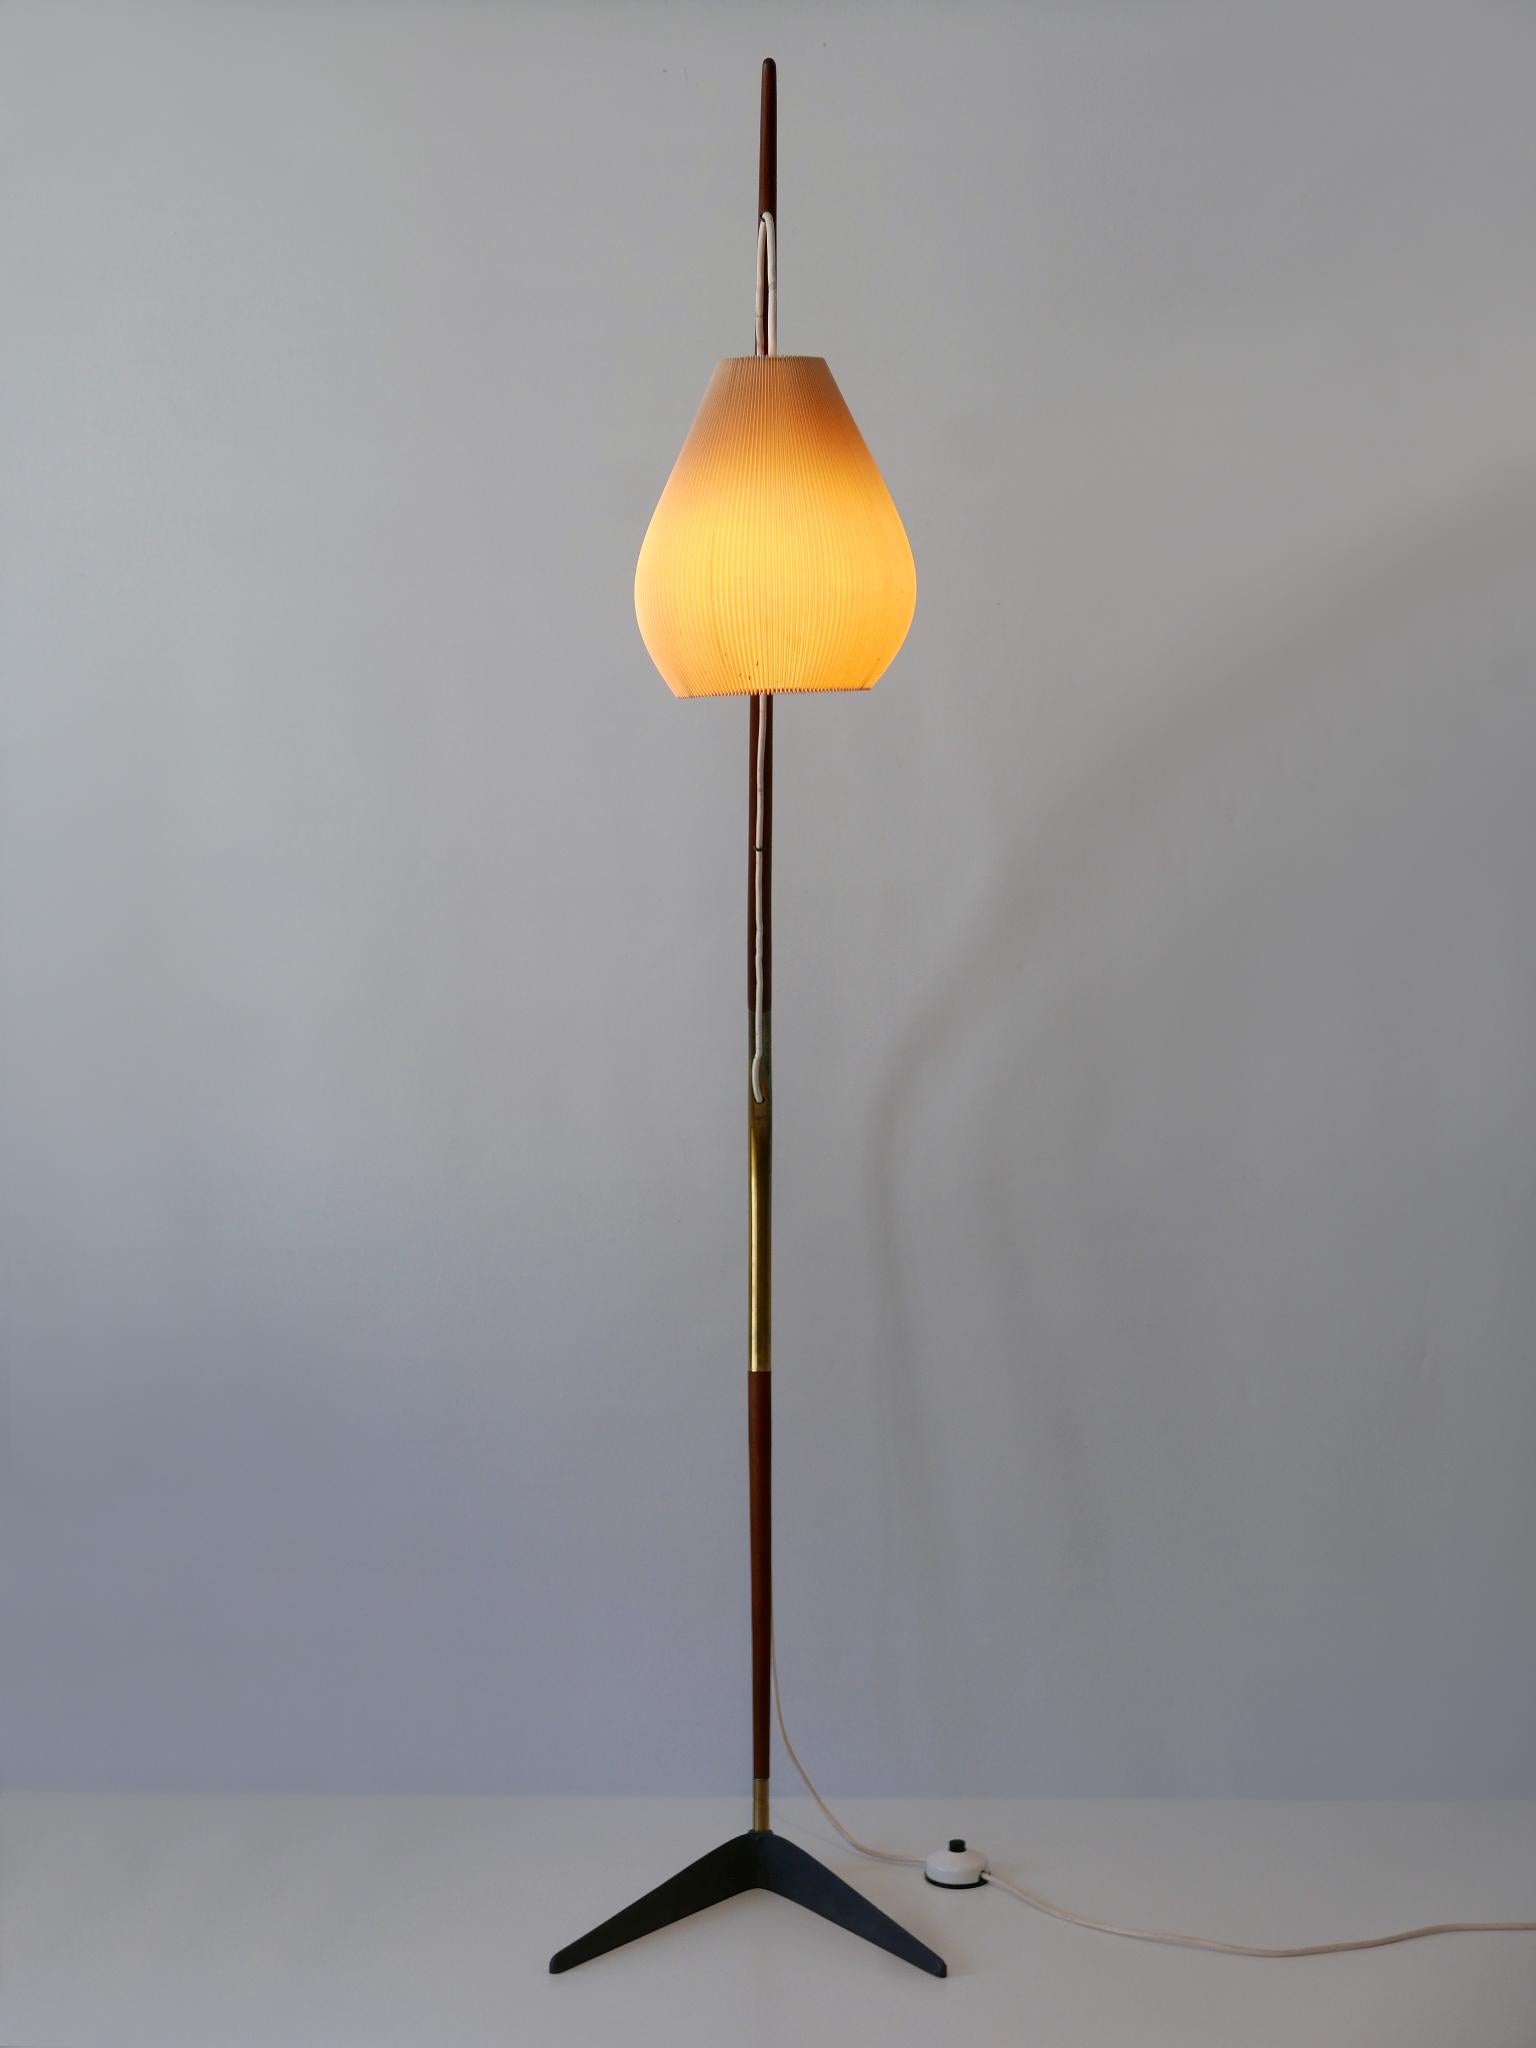 Exceptional 'Fishing Pole' Floor Lamp by Svend Aage Holm Sørensen Denmark 1950s In Good Condition For Sale In Munich, DE